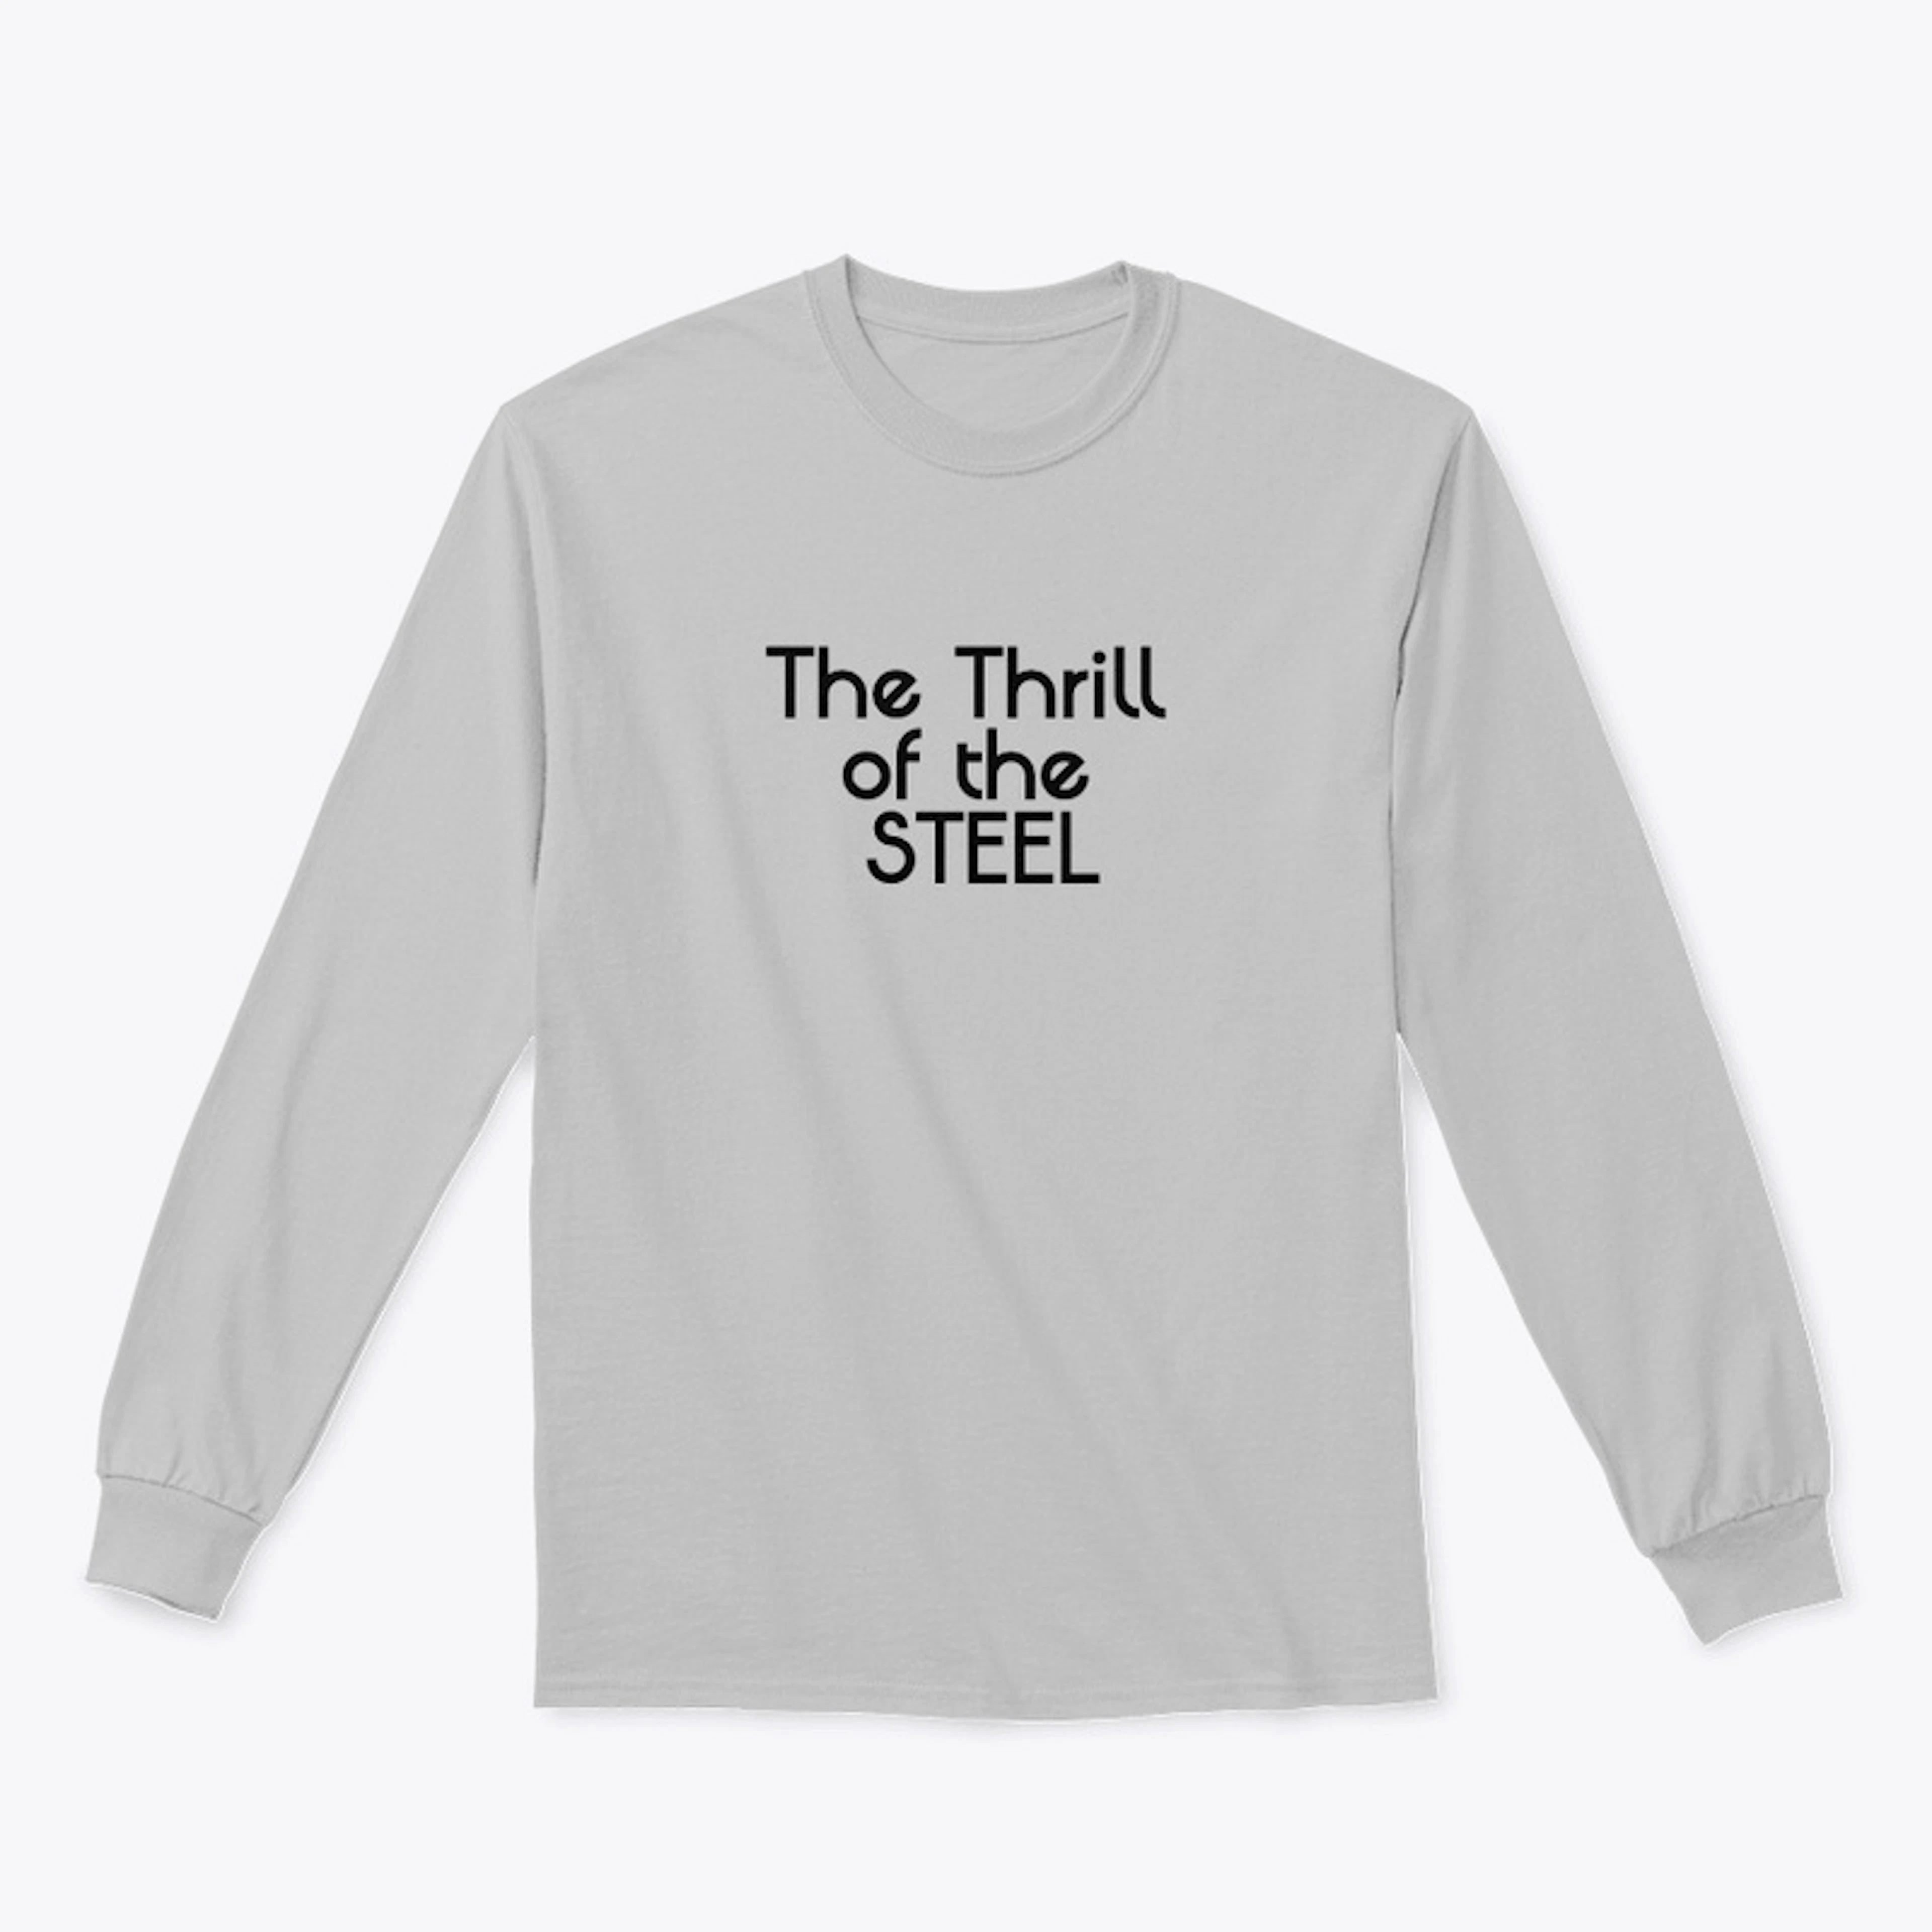 The Thrill of the Steel